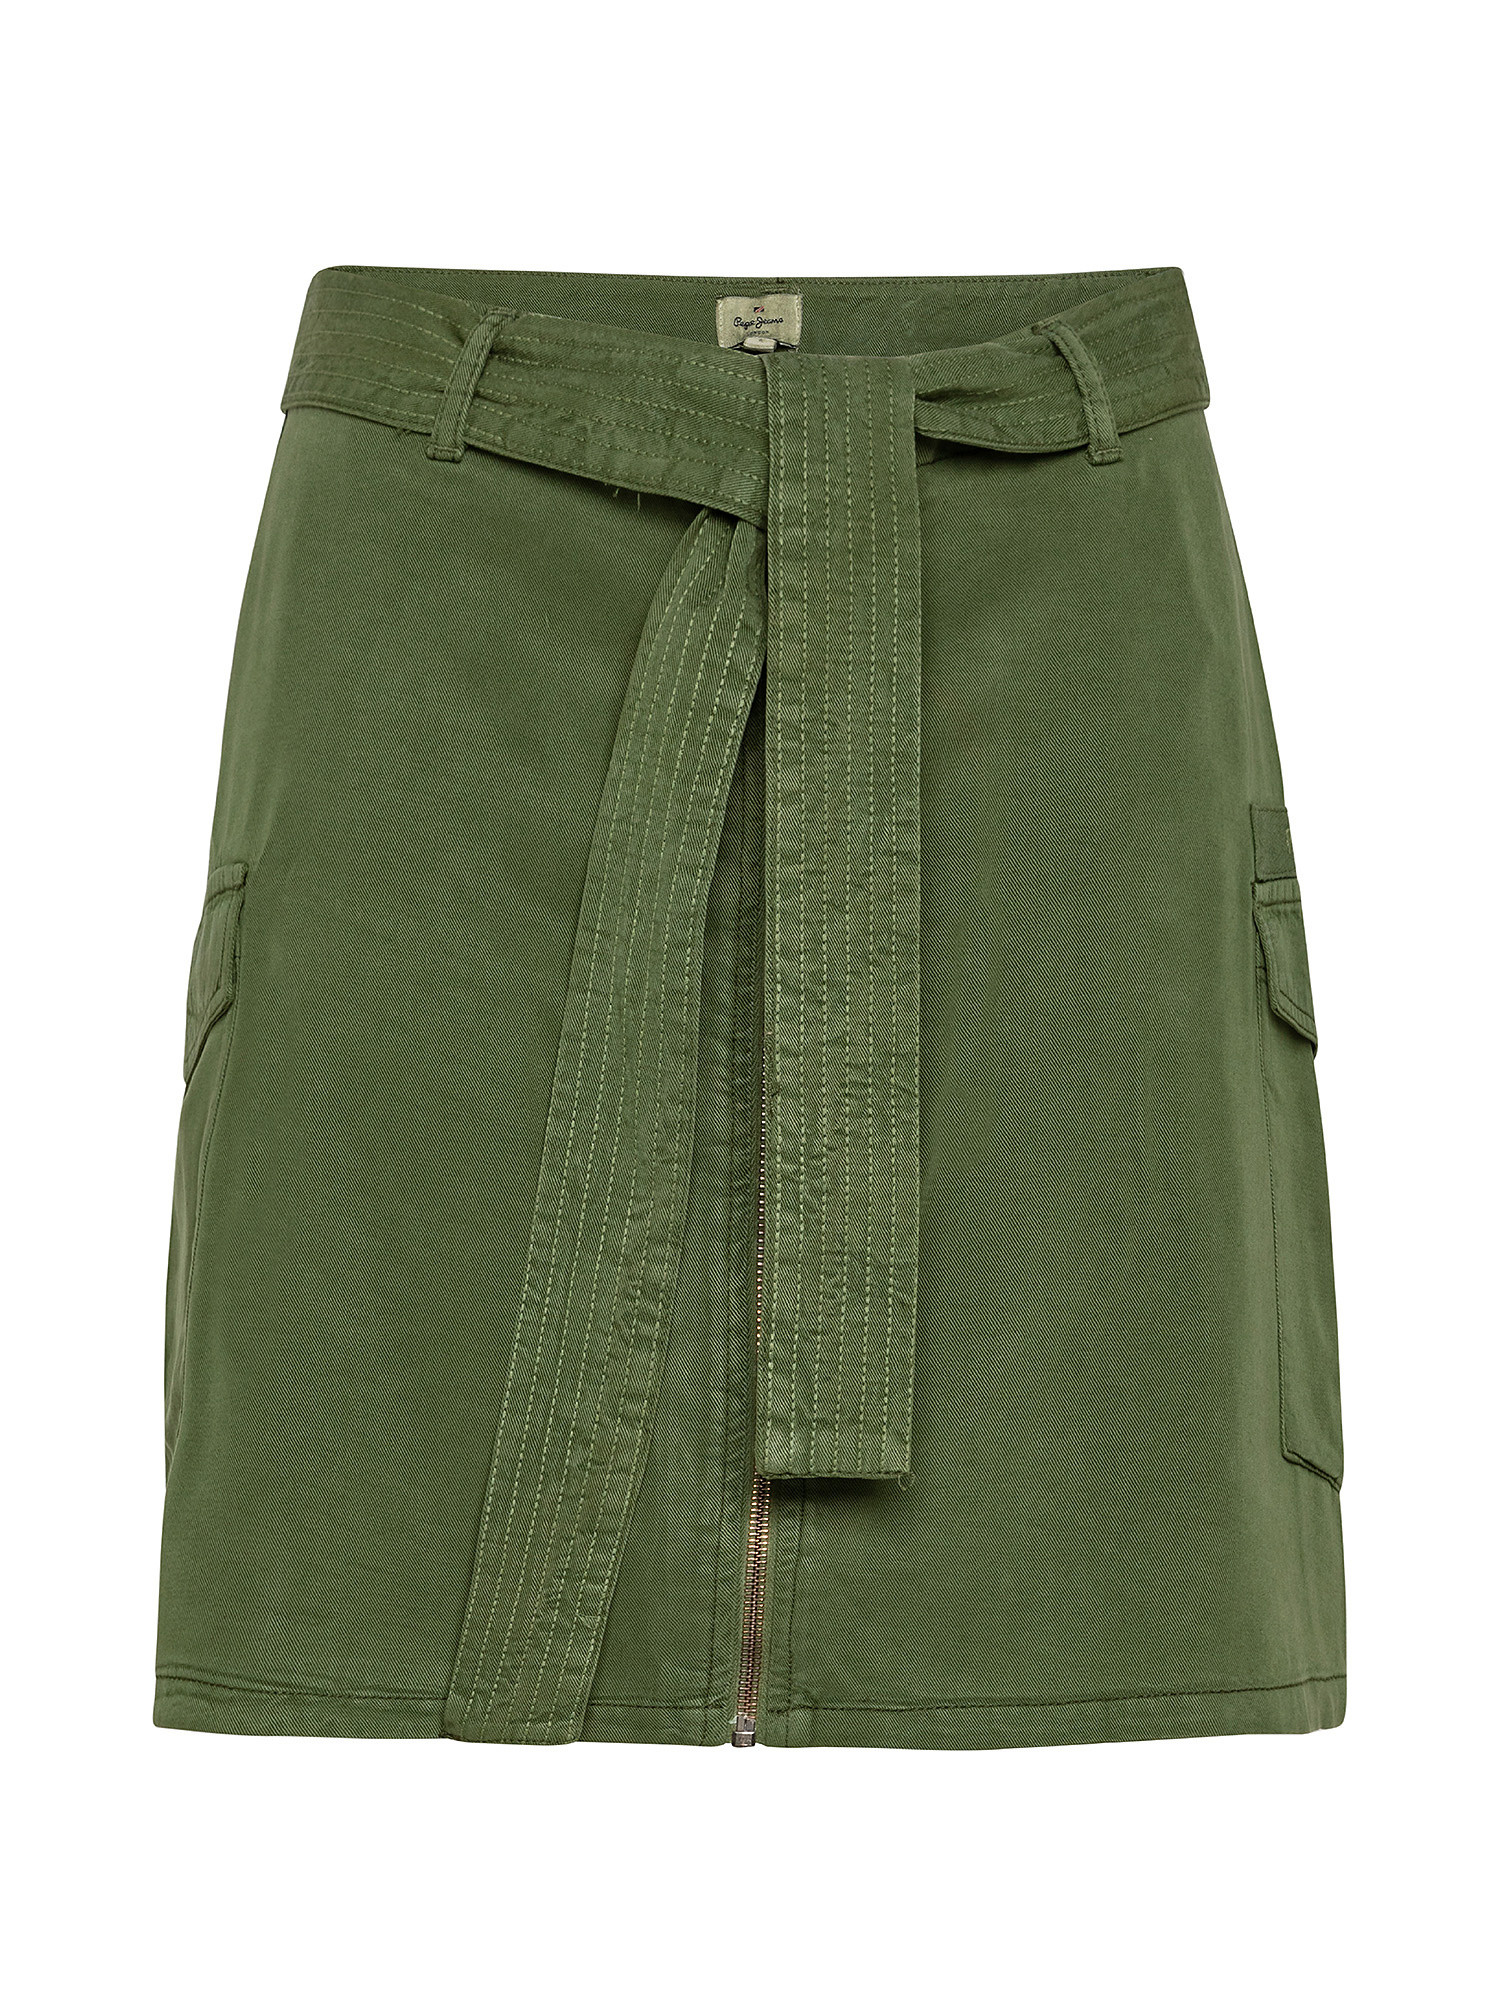 Floren skirt with zip, Green, large image number 0